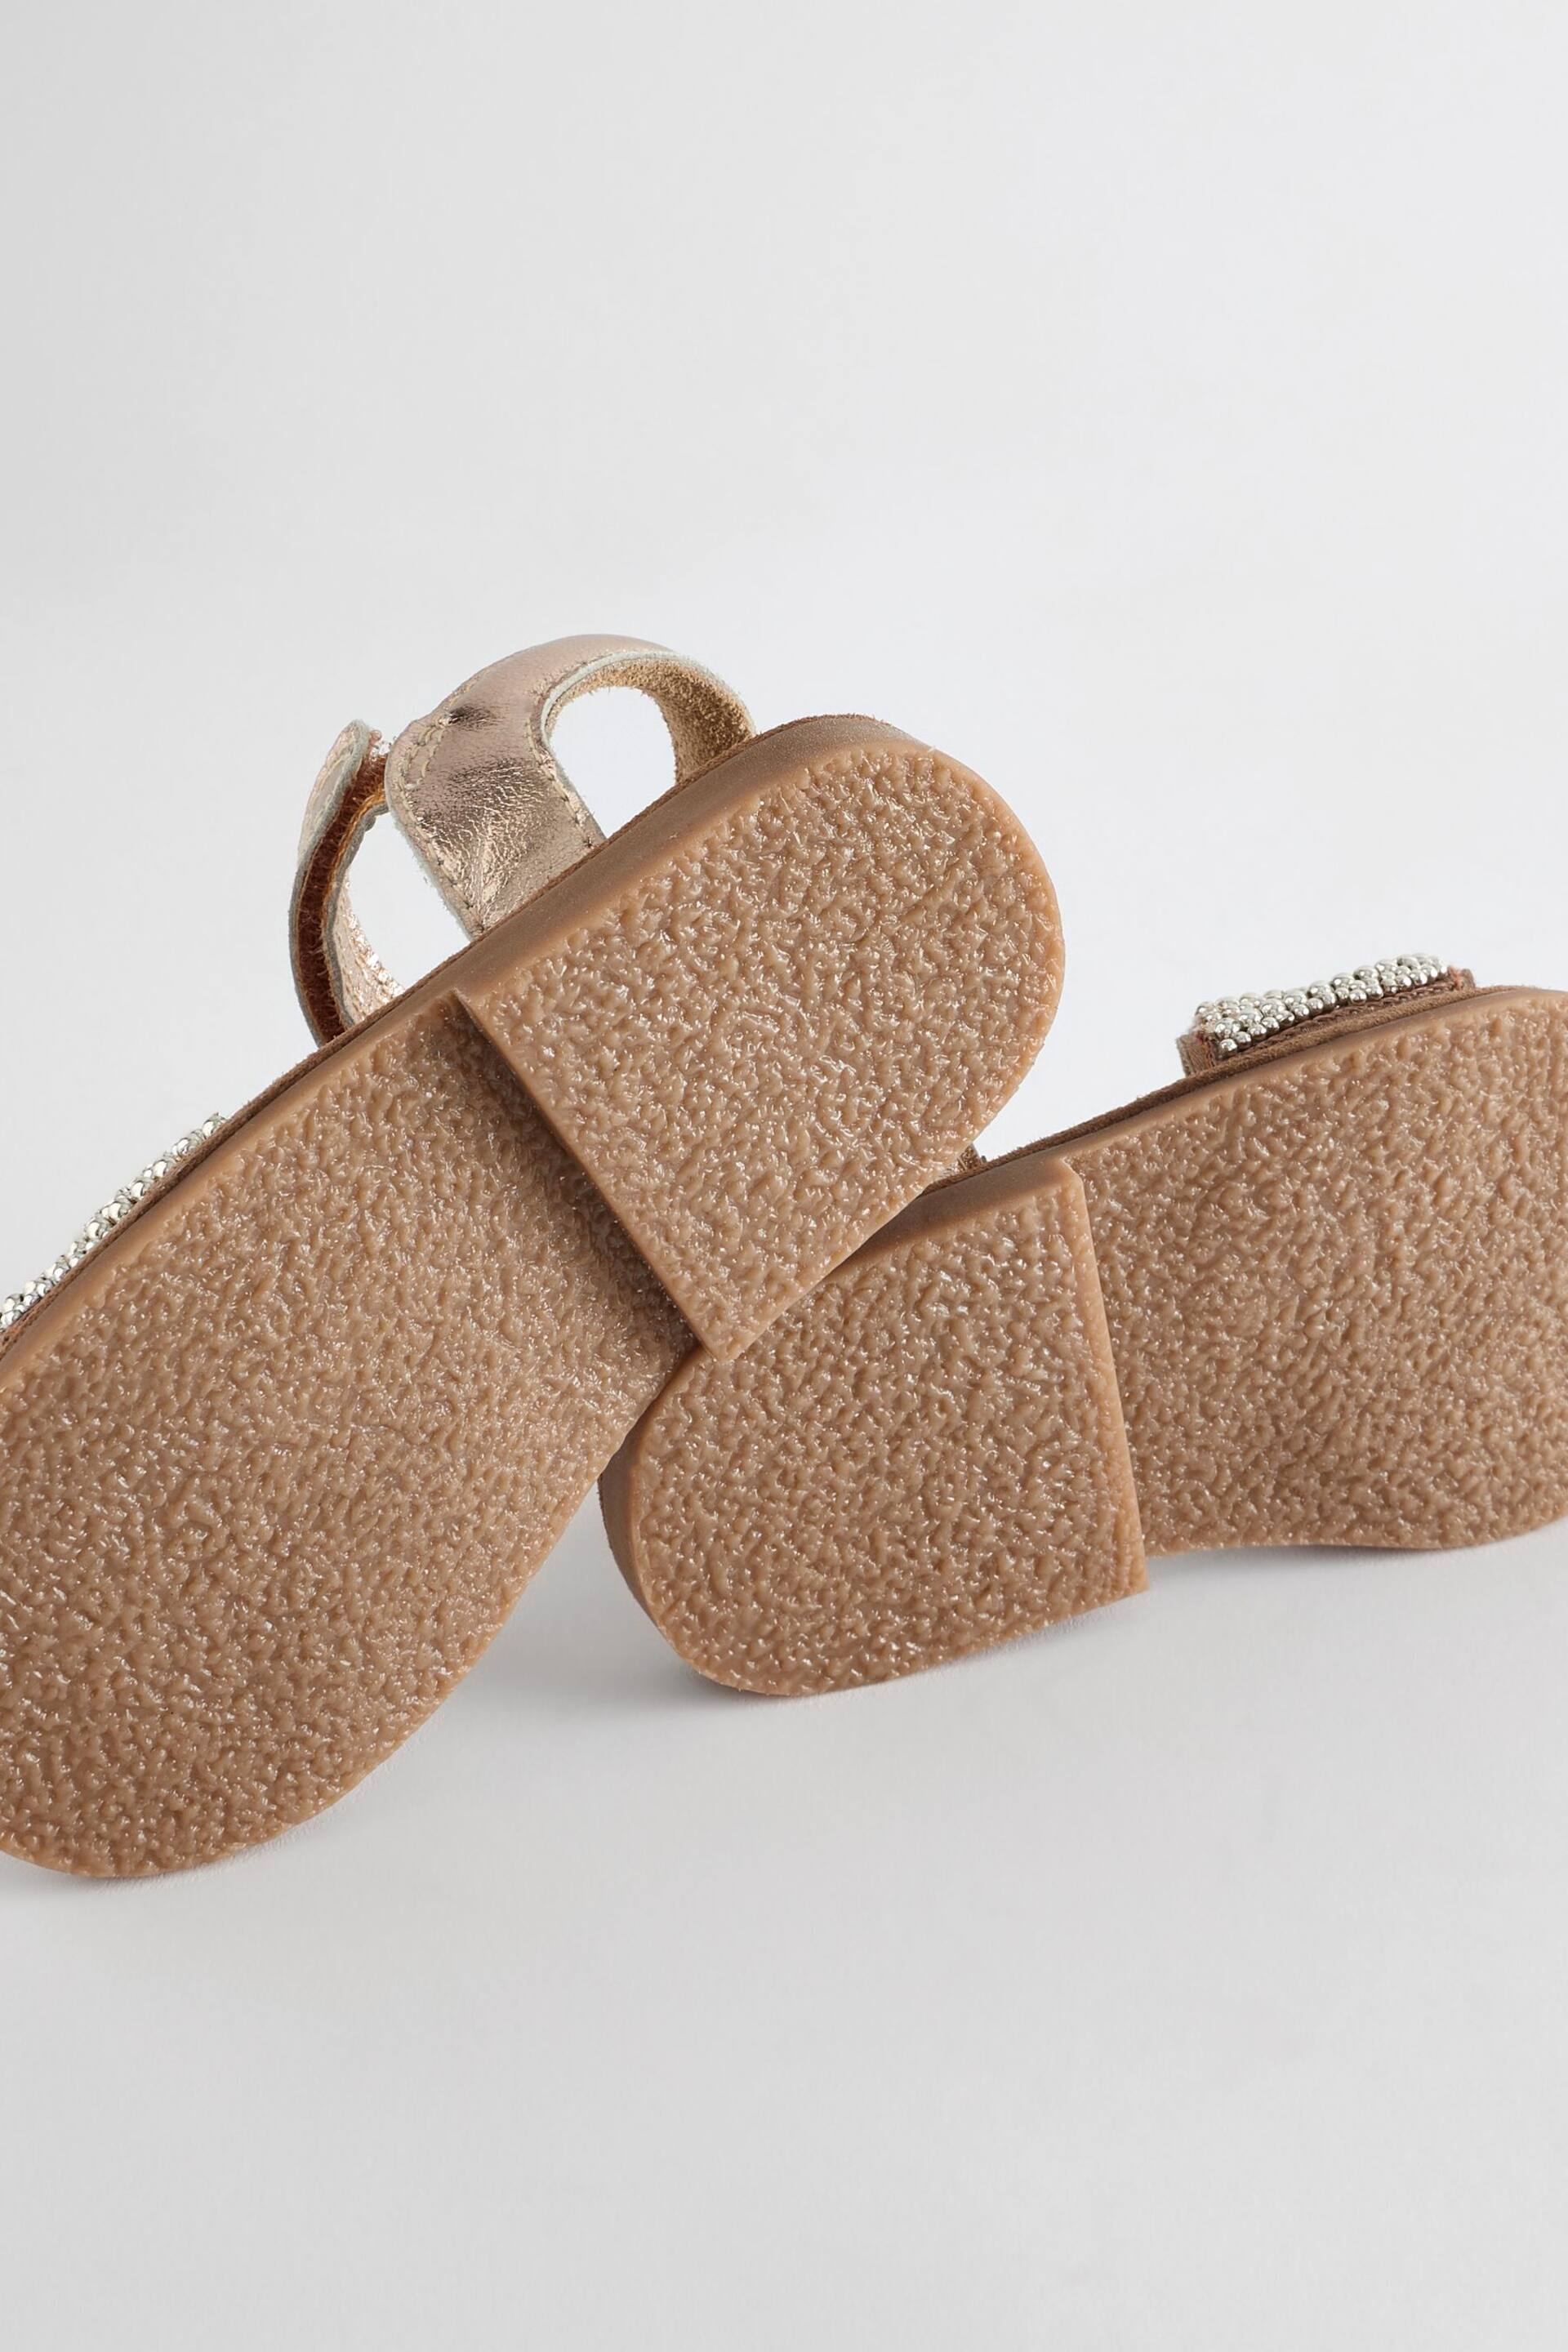 Rose Gold Beaded Occasion Sandals - Image 9 of 10